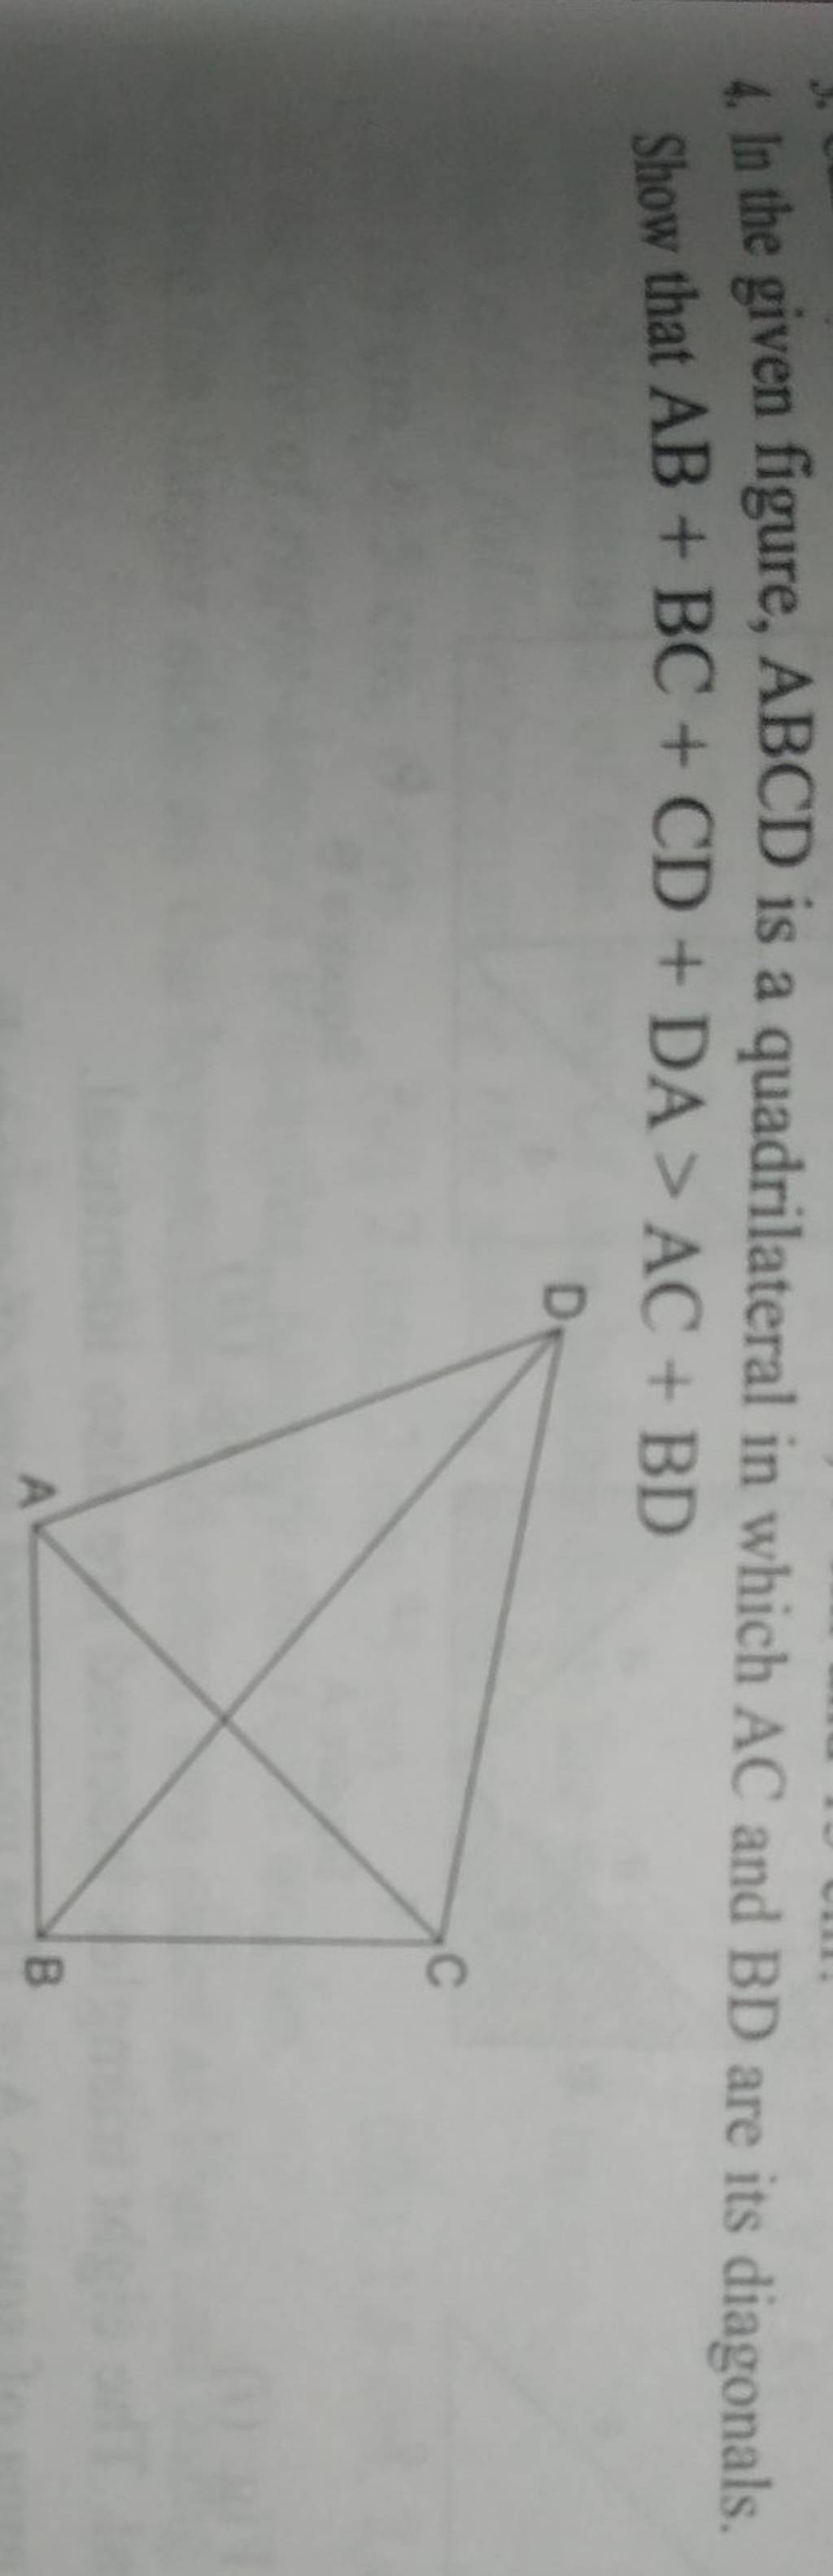 4 In The Given Figure Abcd Is A Quadrilateral In Which Ac And Bd Are It 6575